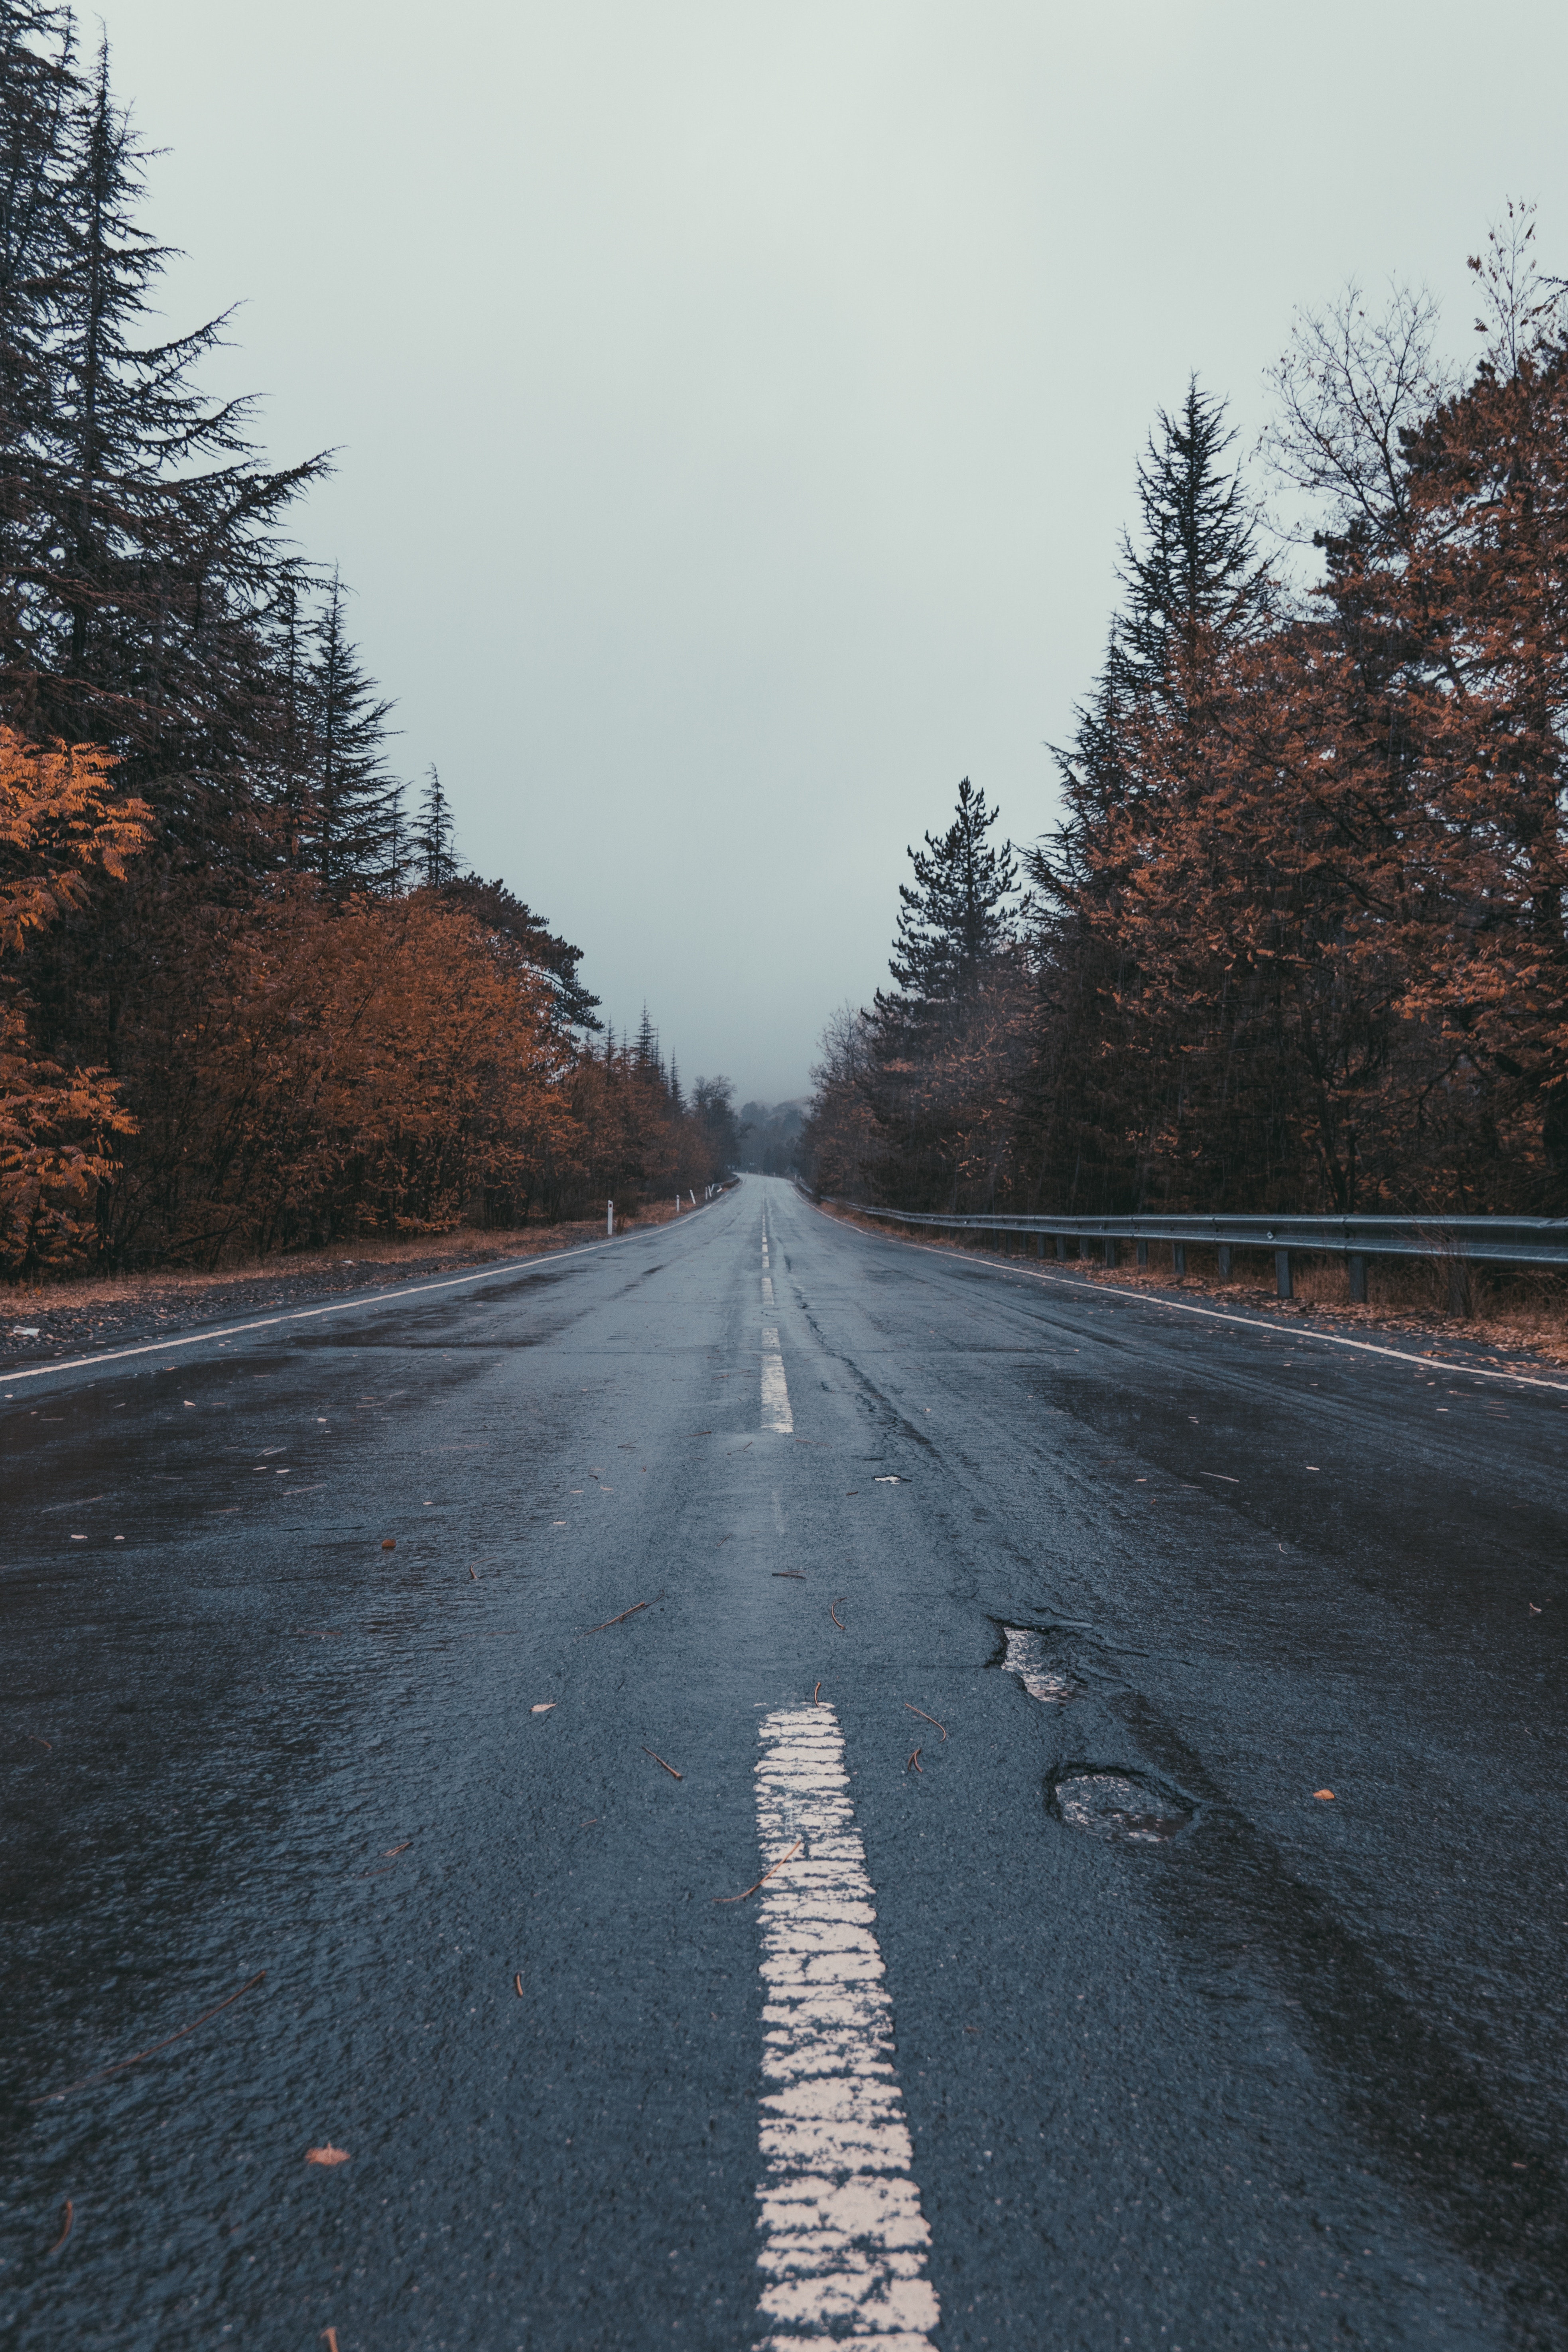 mainly cloudy, nature, trees, road, markup, overcast images